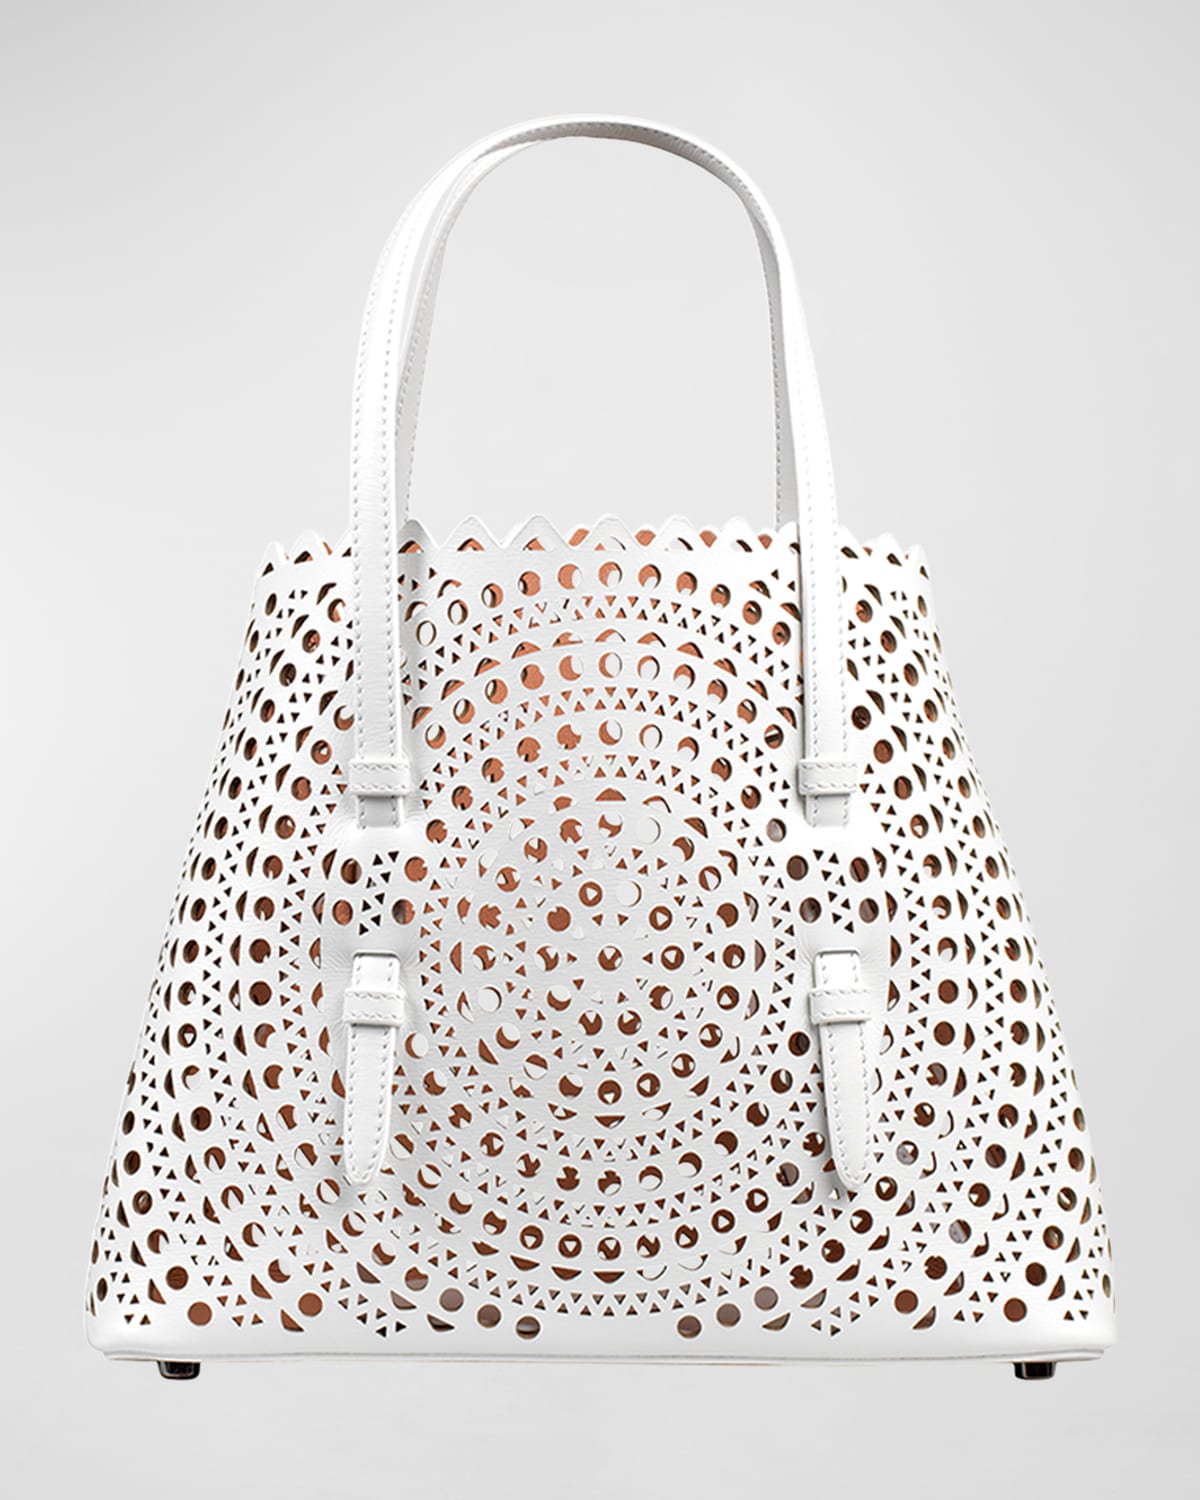 Mina 20 Tote Bag in Vienne Perforated Leather